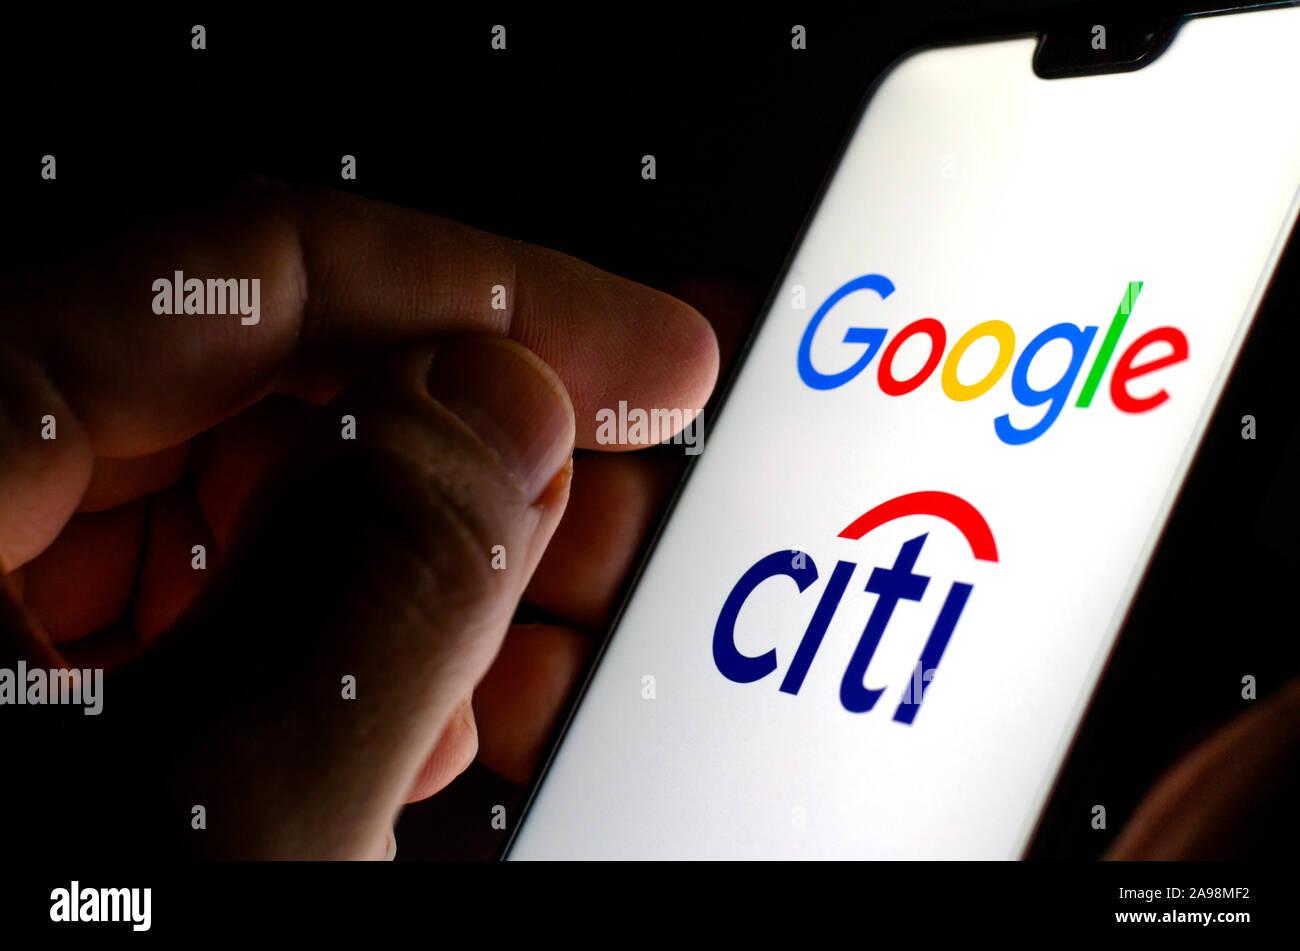 Google and Citigroup logos on glowing screen in hands. Illustrative photo for news that Google partnered with Citibank in project called Cache Stock Photo